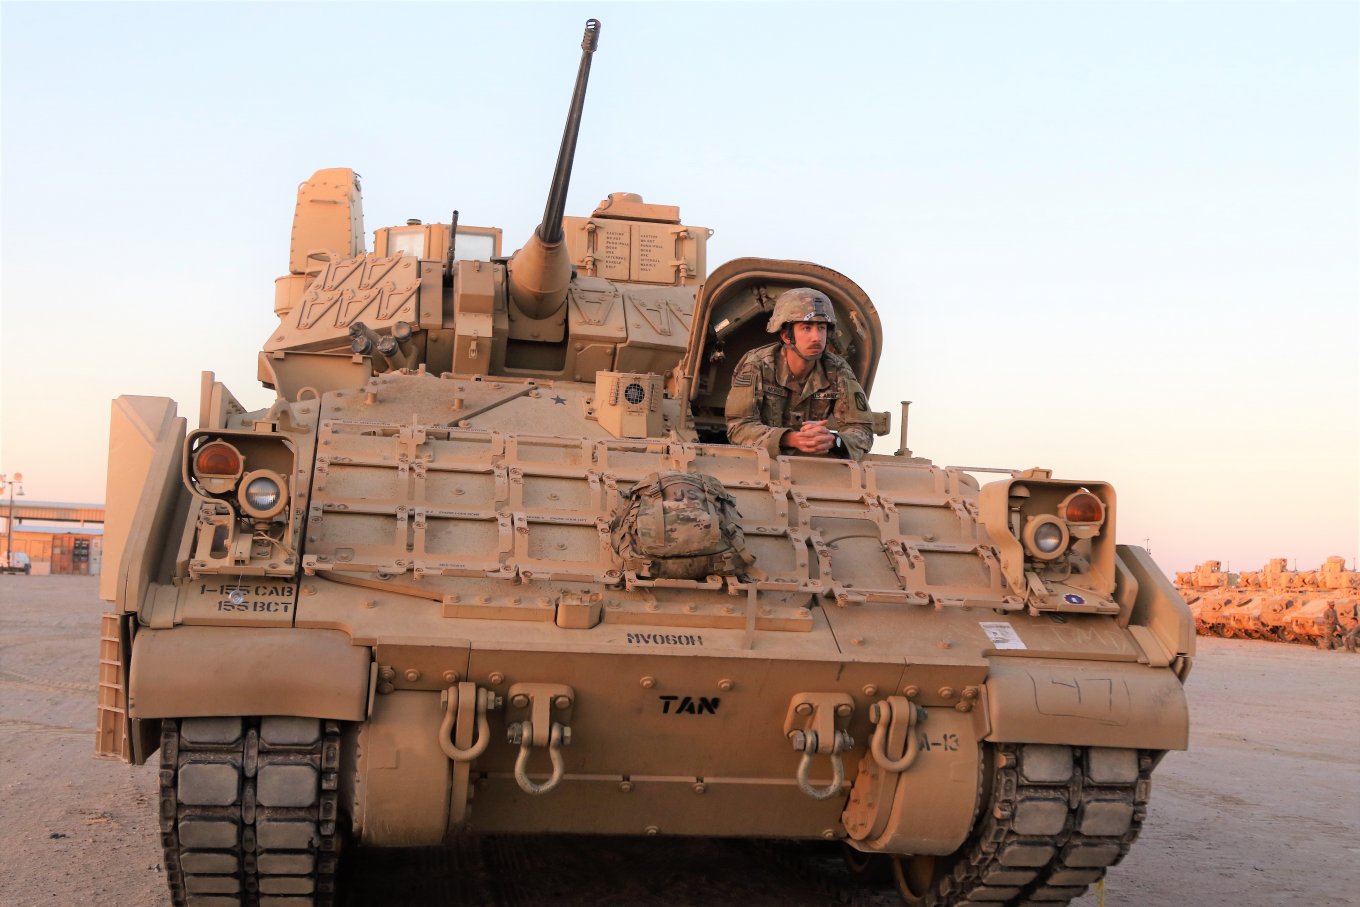 M2 Bradley with a framework for reactive armor. U.S. Amy 155th Armored Brigade Combat Team, Kuwait